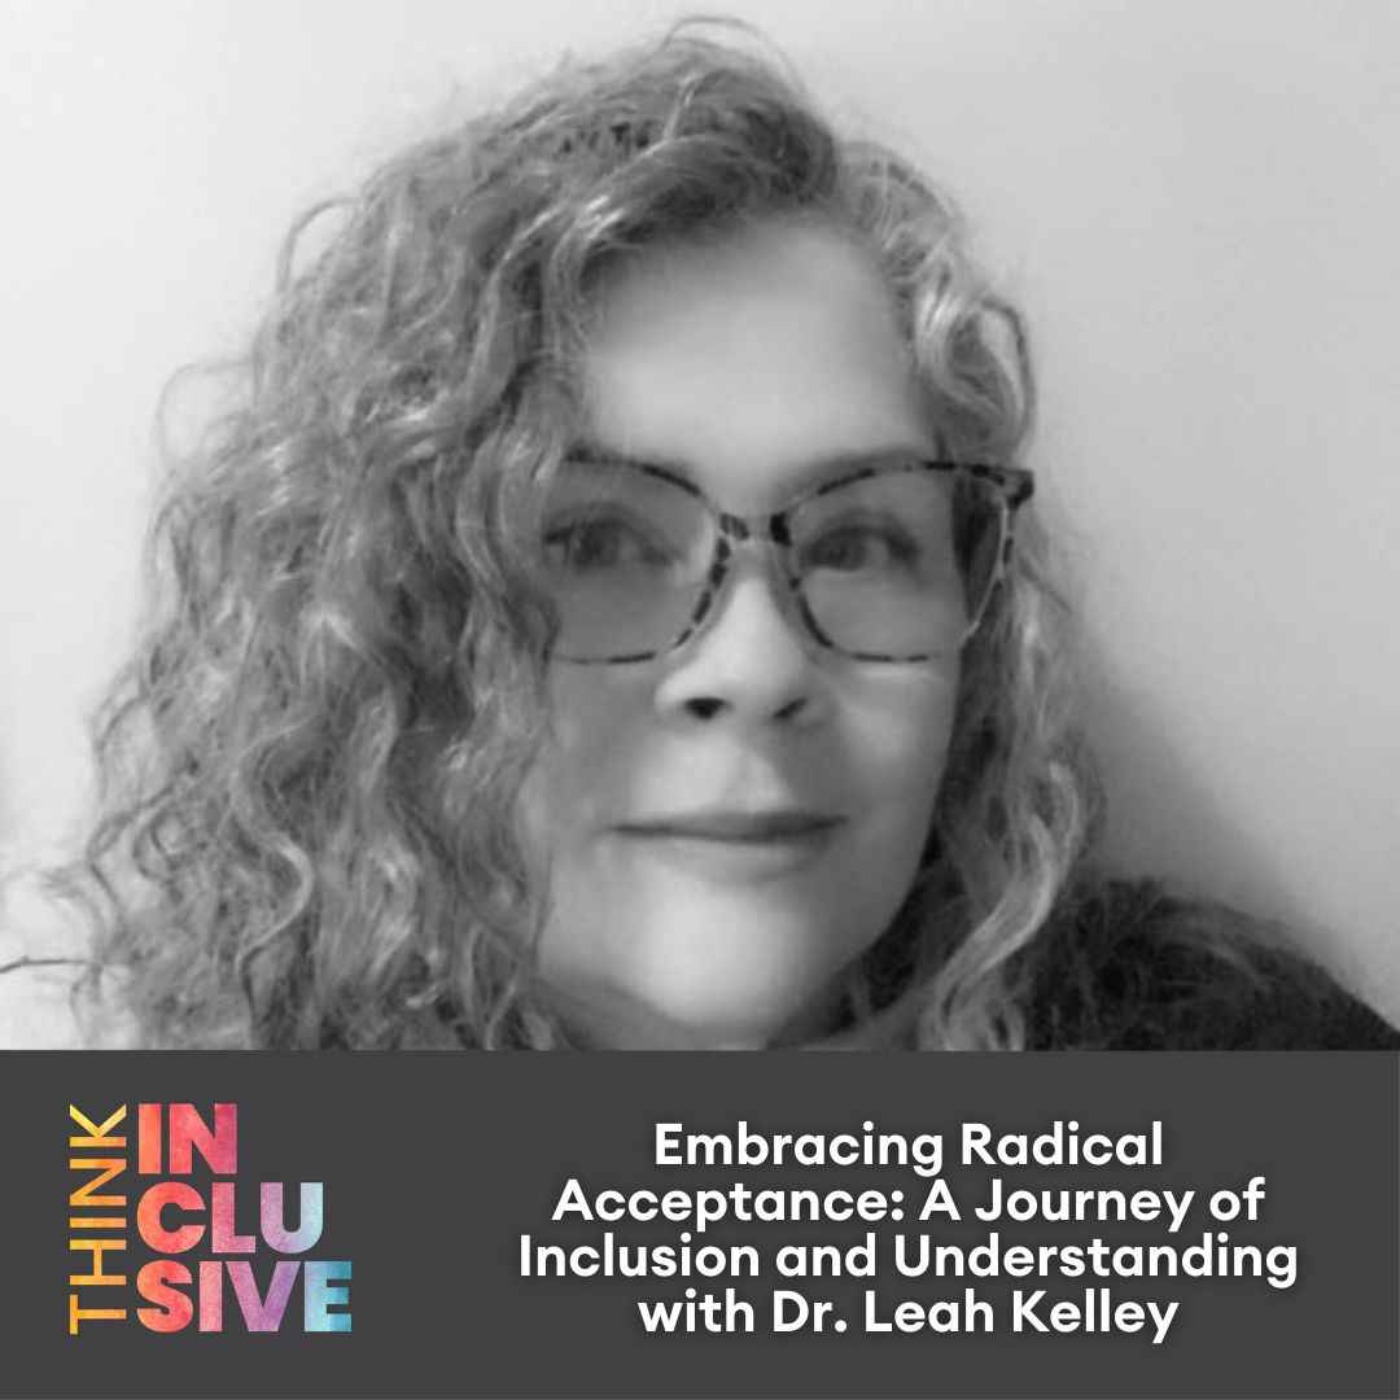 Embracing Radical Acceptance: A Journey of Inclusion and Understanding with Dr. Leah Kelley